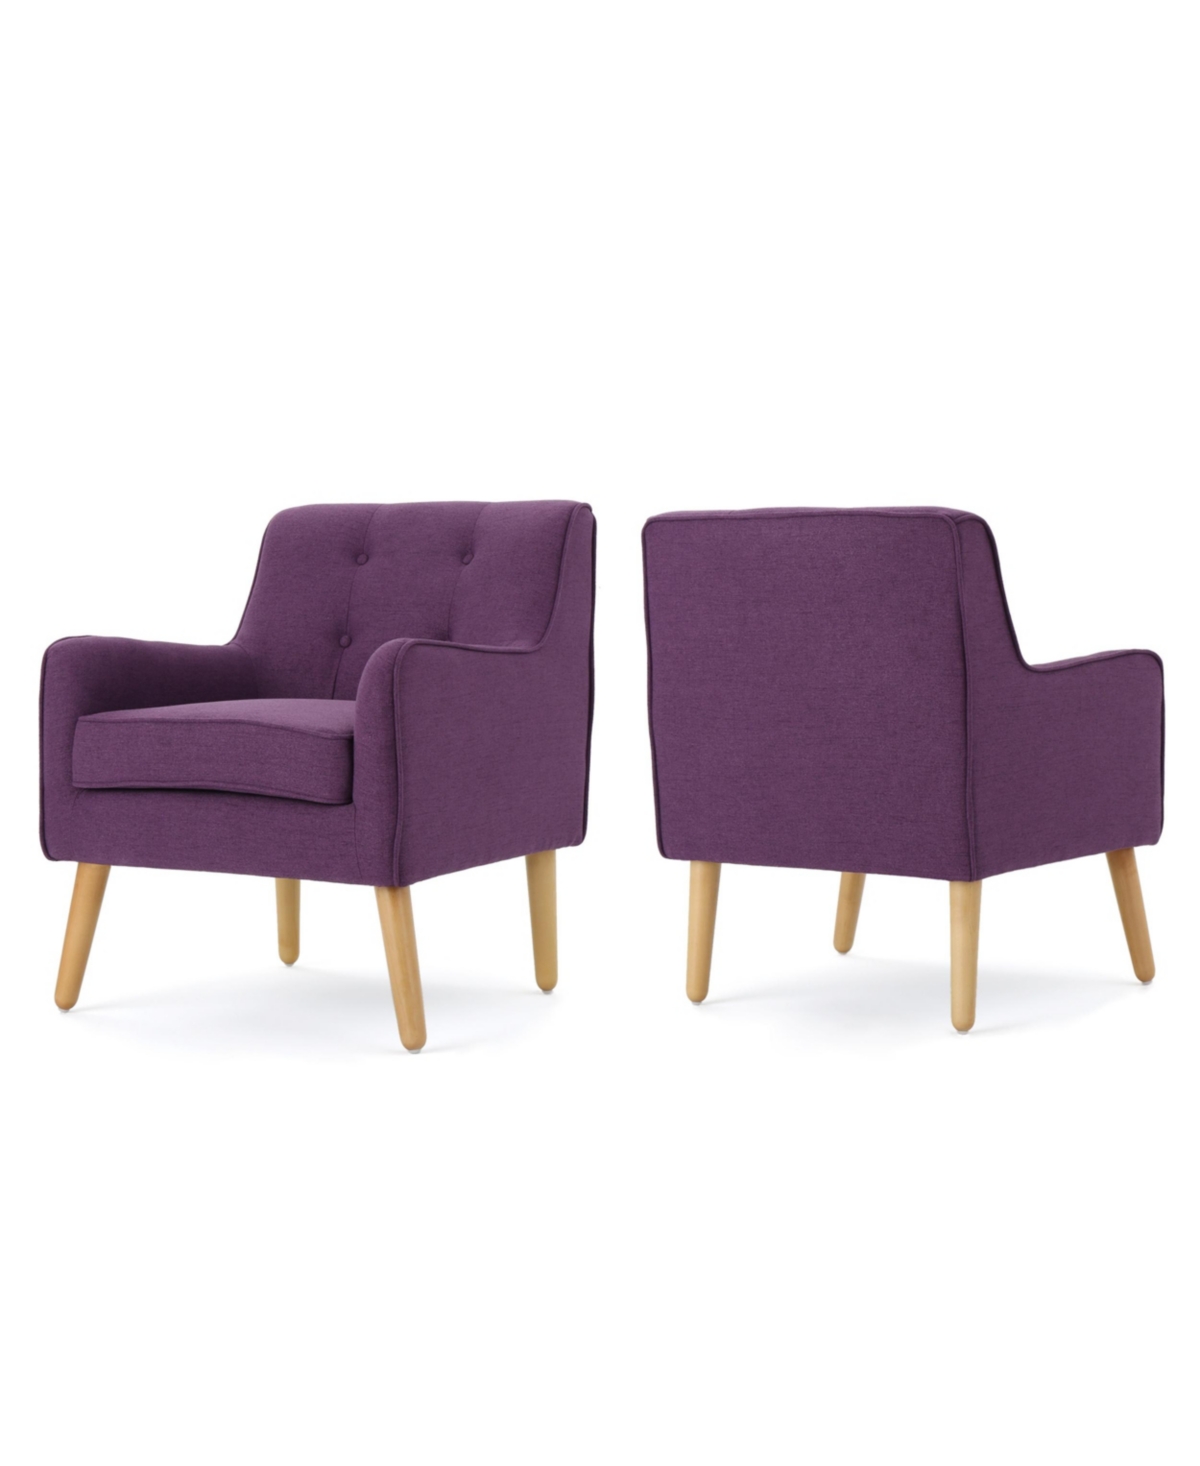 Noble House Felicity Mid Century Arm Chair Set, 2 Piece In Purple